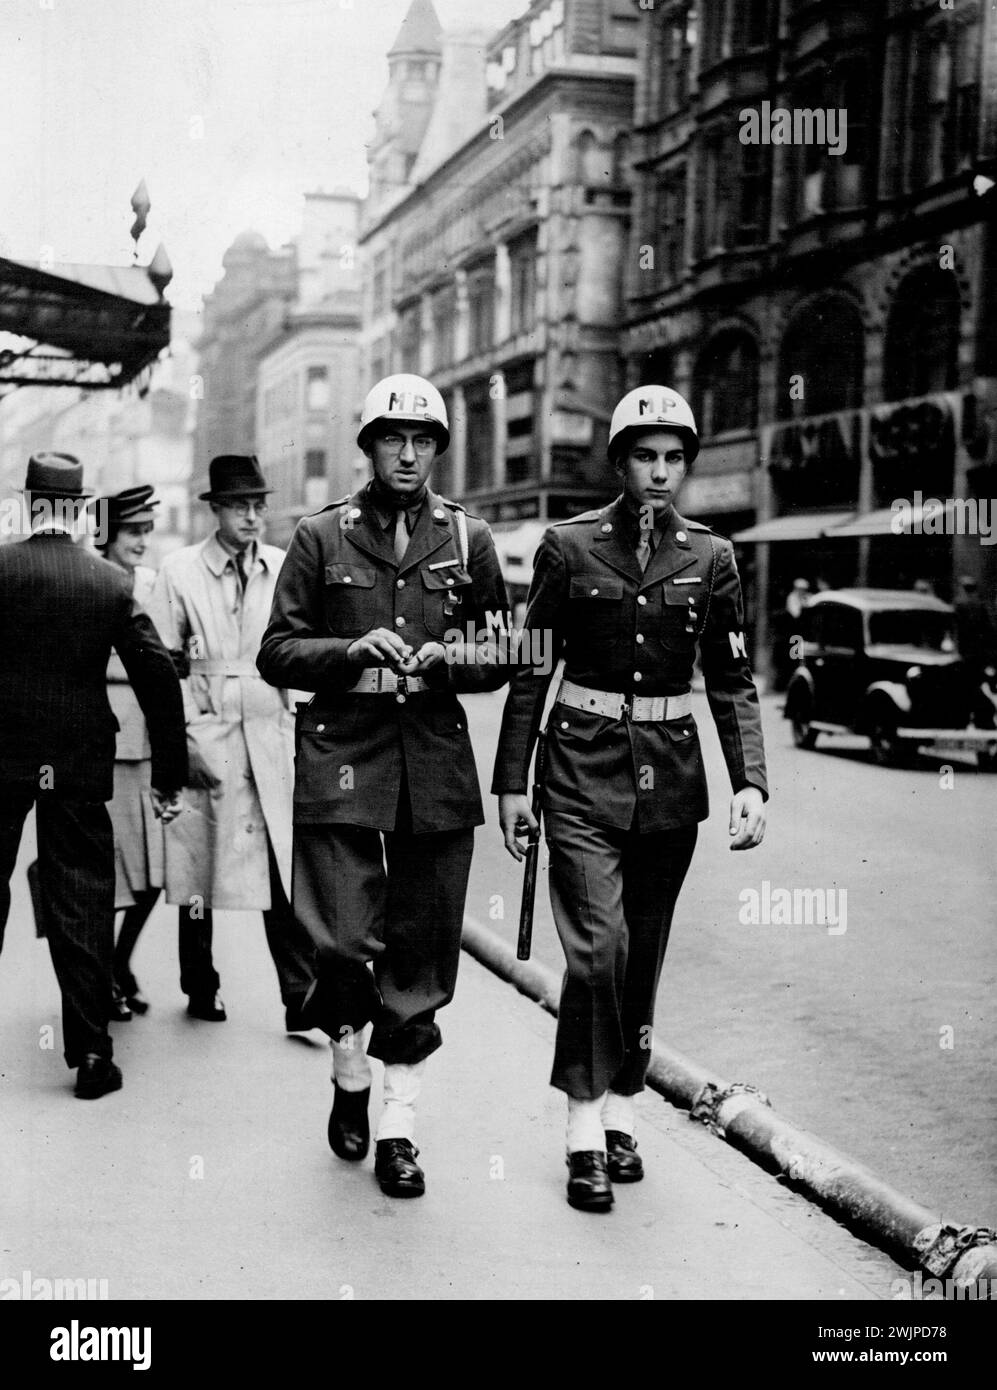 Birmingham In Wartime -- American Military Police, with white black out helmet, belt and anklets patrol New street. November 01, 1949. (Photo by Pictorial Press) Stock Photo